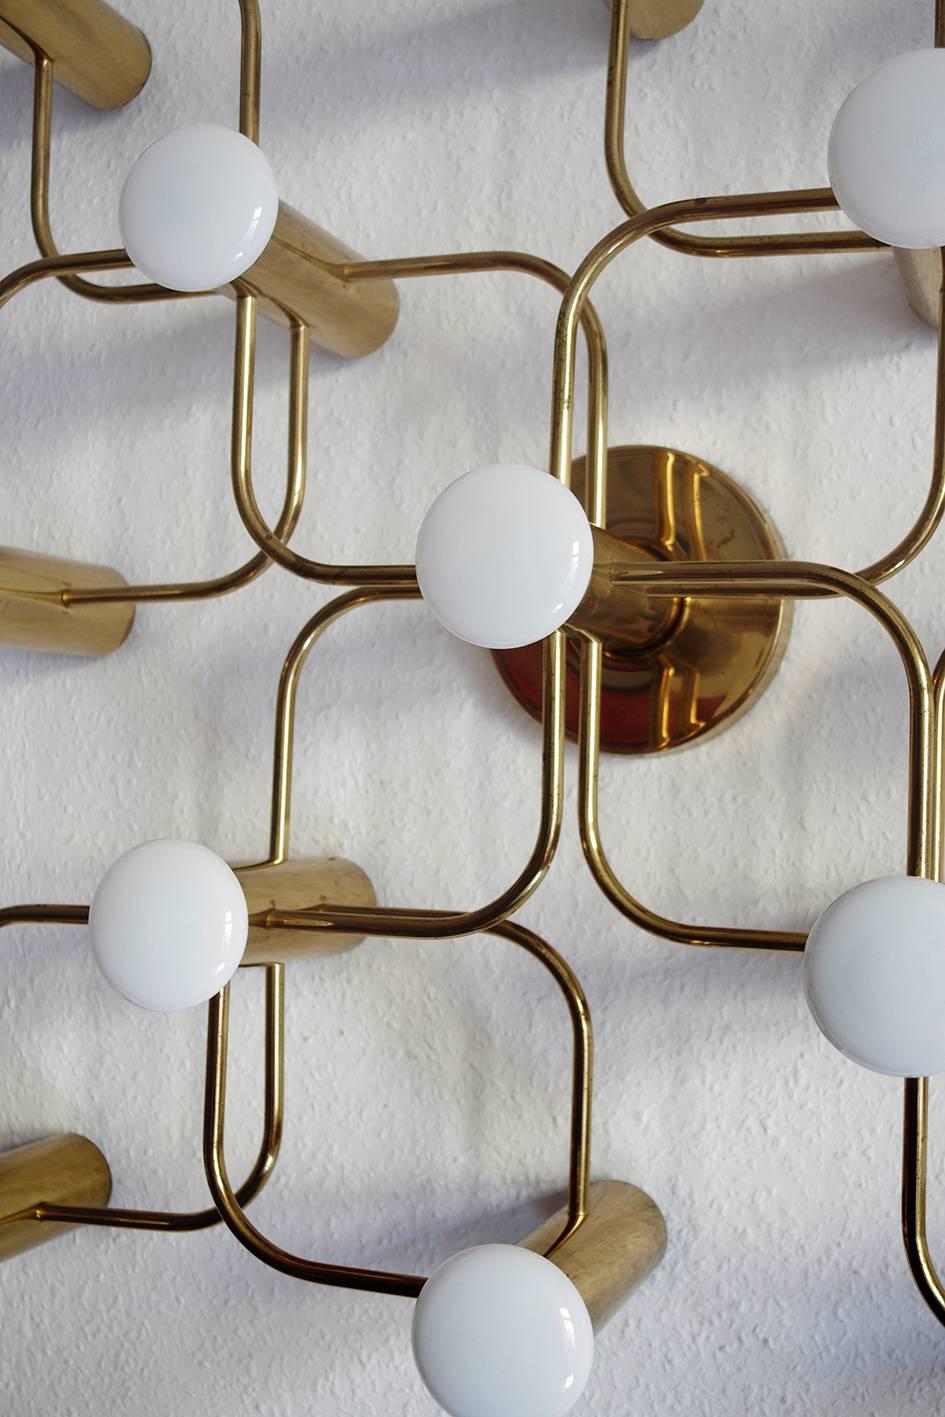 Sculptural Sciolari style ceiling or wall flush mount/chandelier in brass by Leola.
Germany, 1960s.